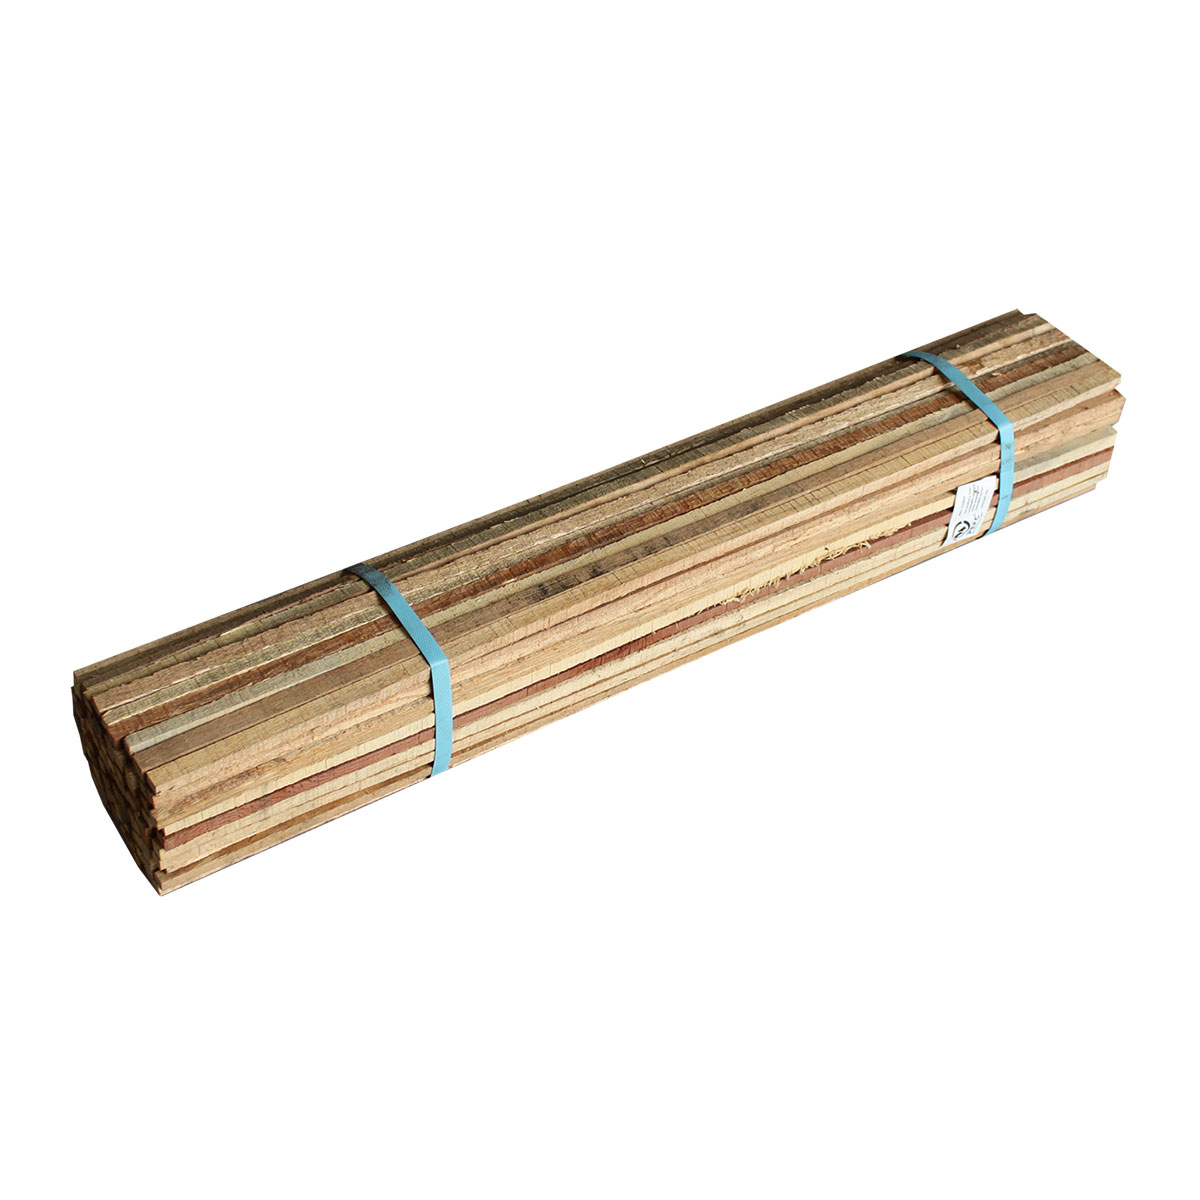 Hardwood Stakes 12 x 12 x 900mm - 100 Pack